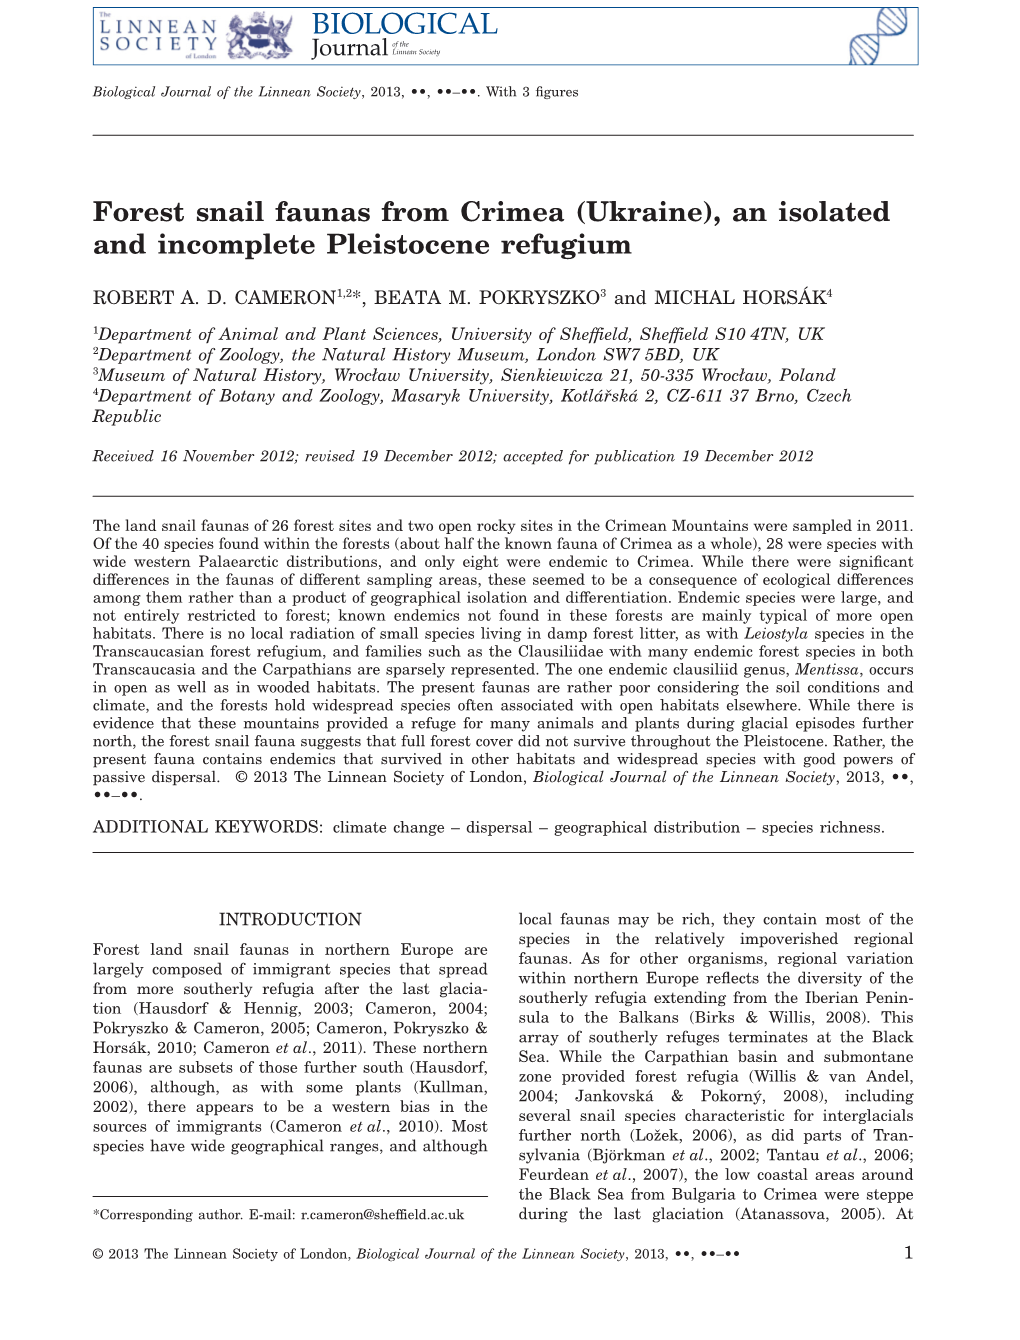 Forest Snail Faunas from Crimea (Ukraine), an Isolated and Incomplete Pleistocene Refugium